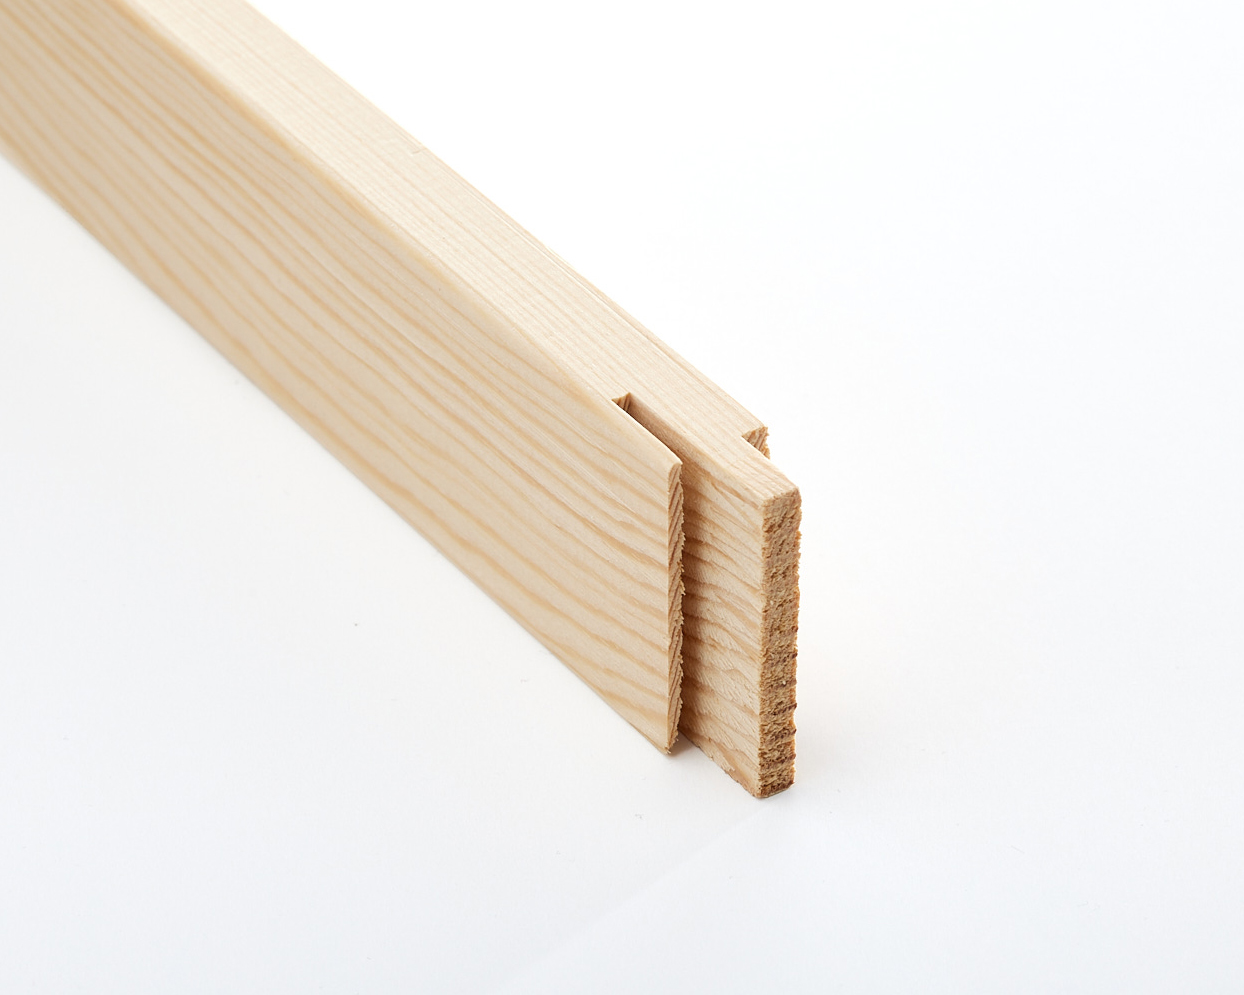 Cross Bars for XXL Stretcher Bars - Certified Wood